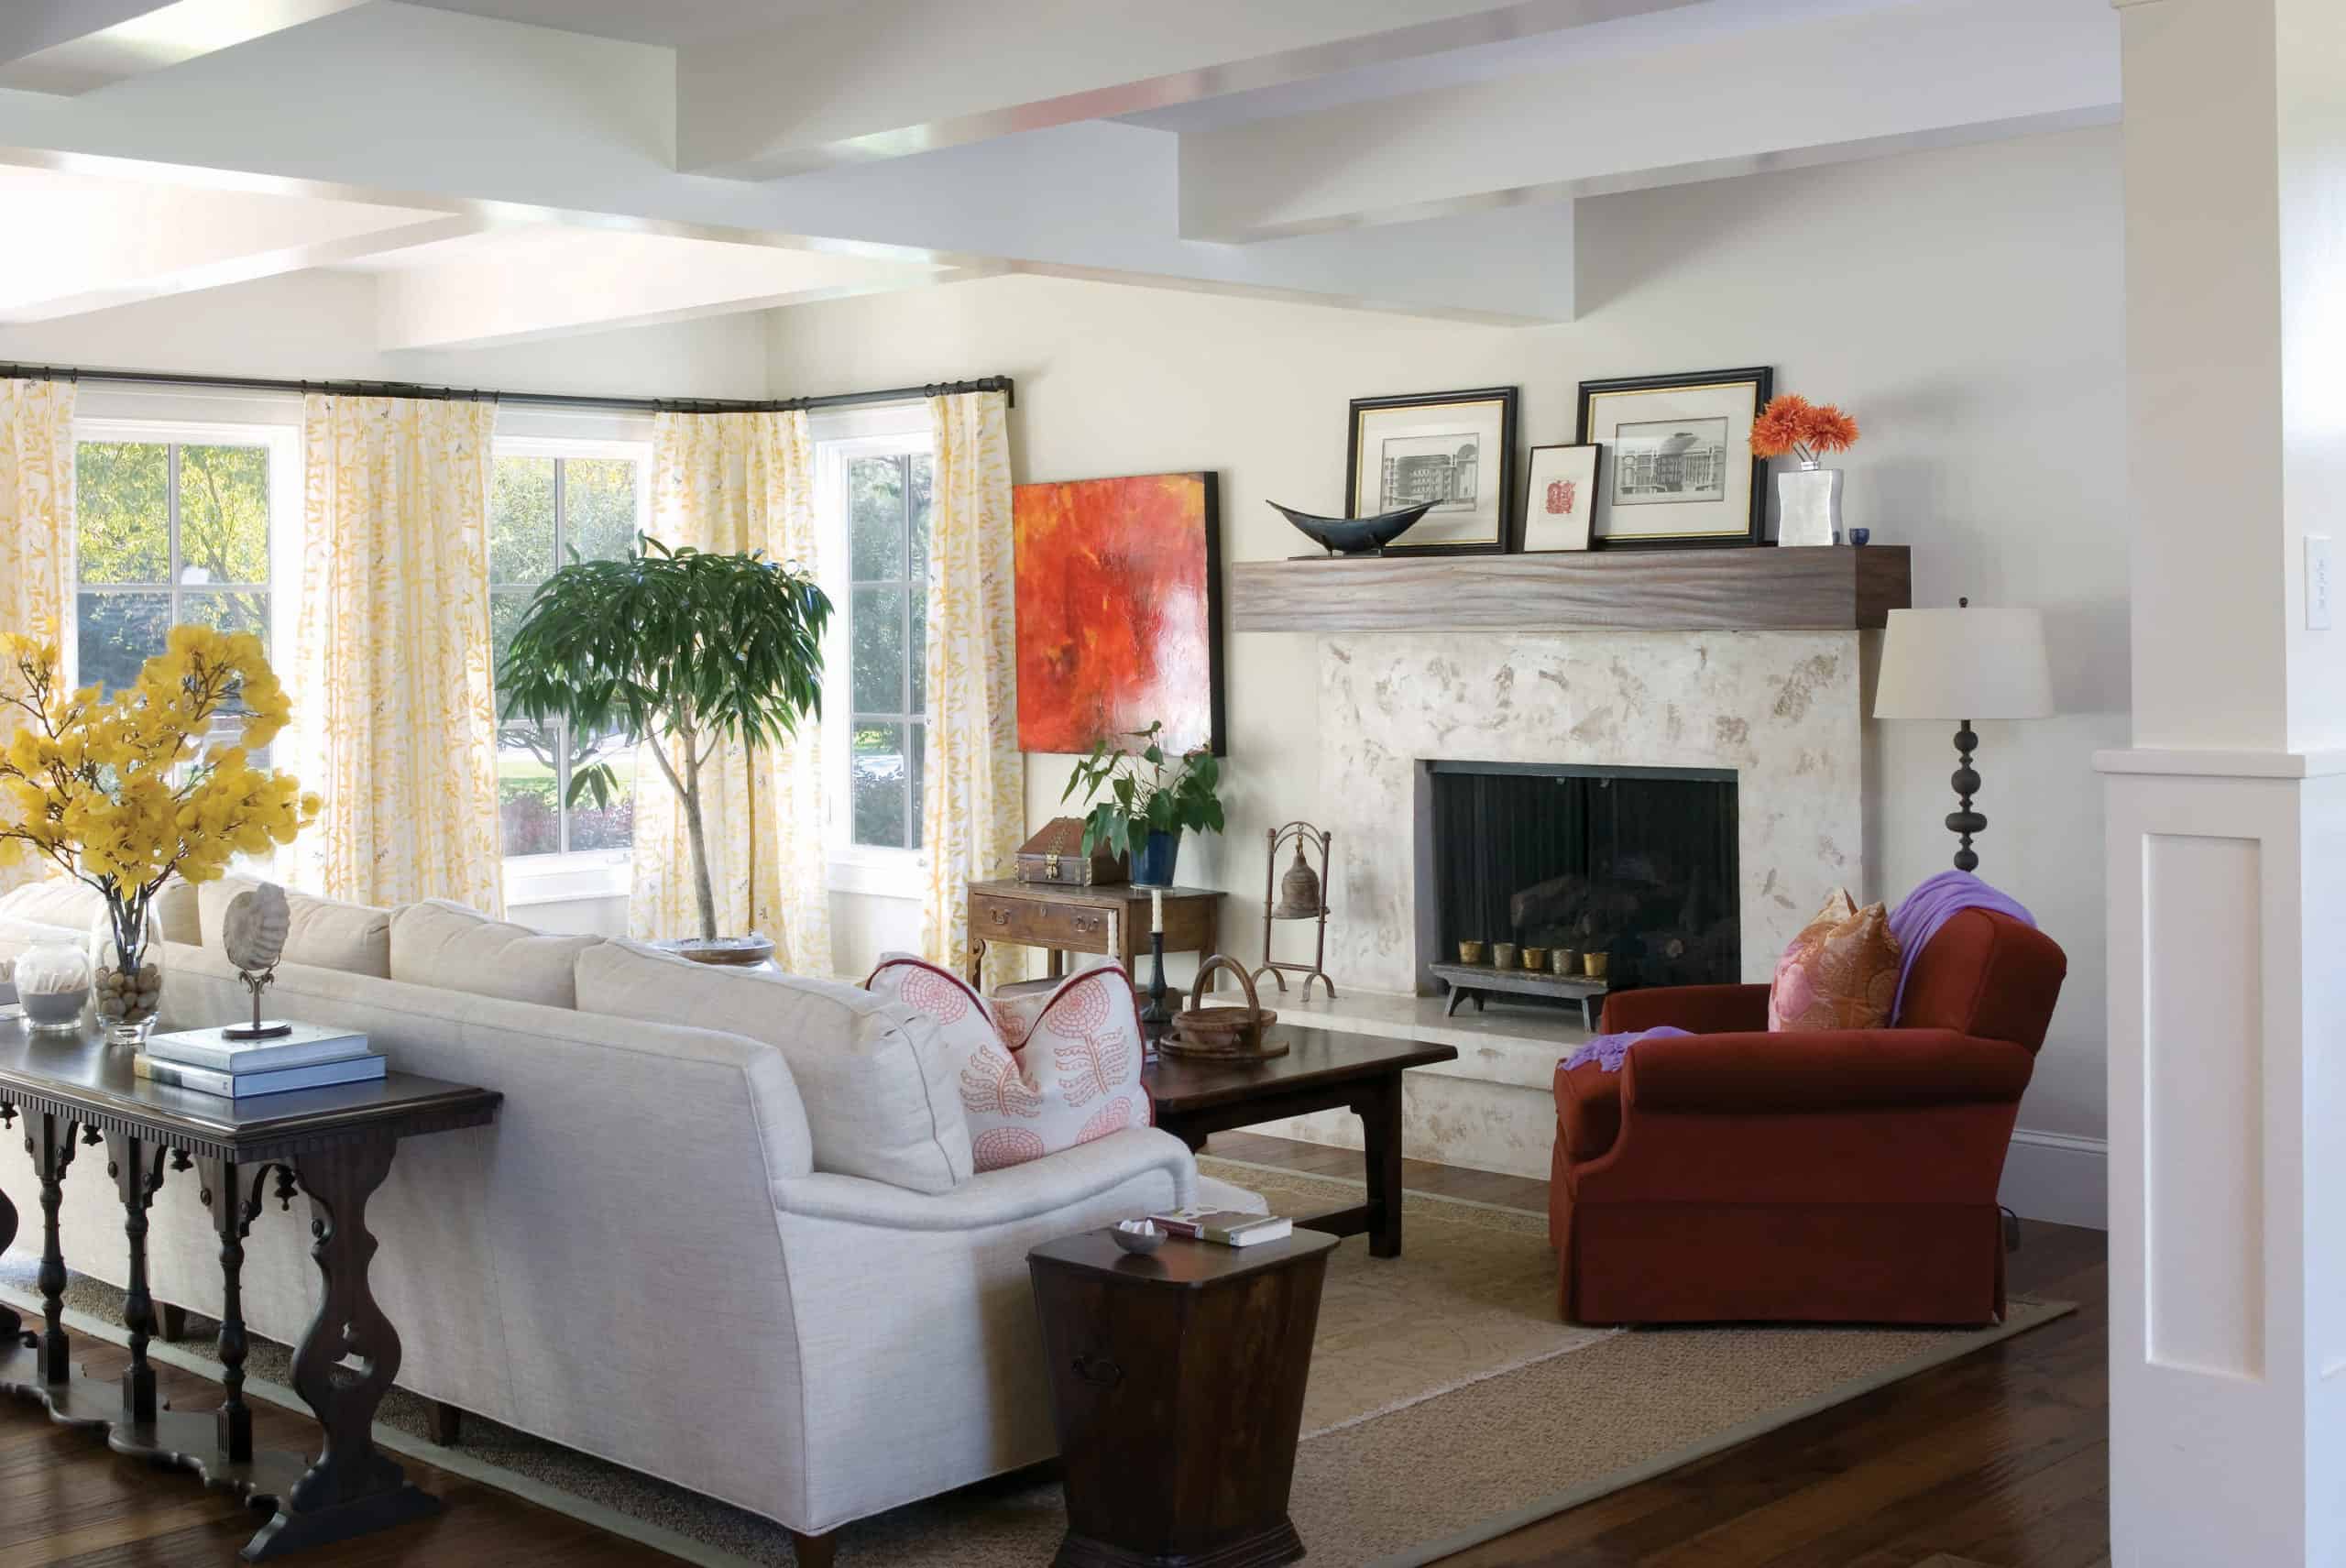 Redesigned family room with bright windows and modern wood burning fireplace in Renovation Remodel